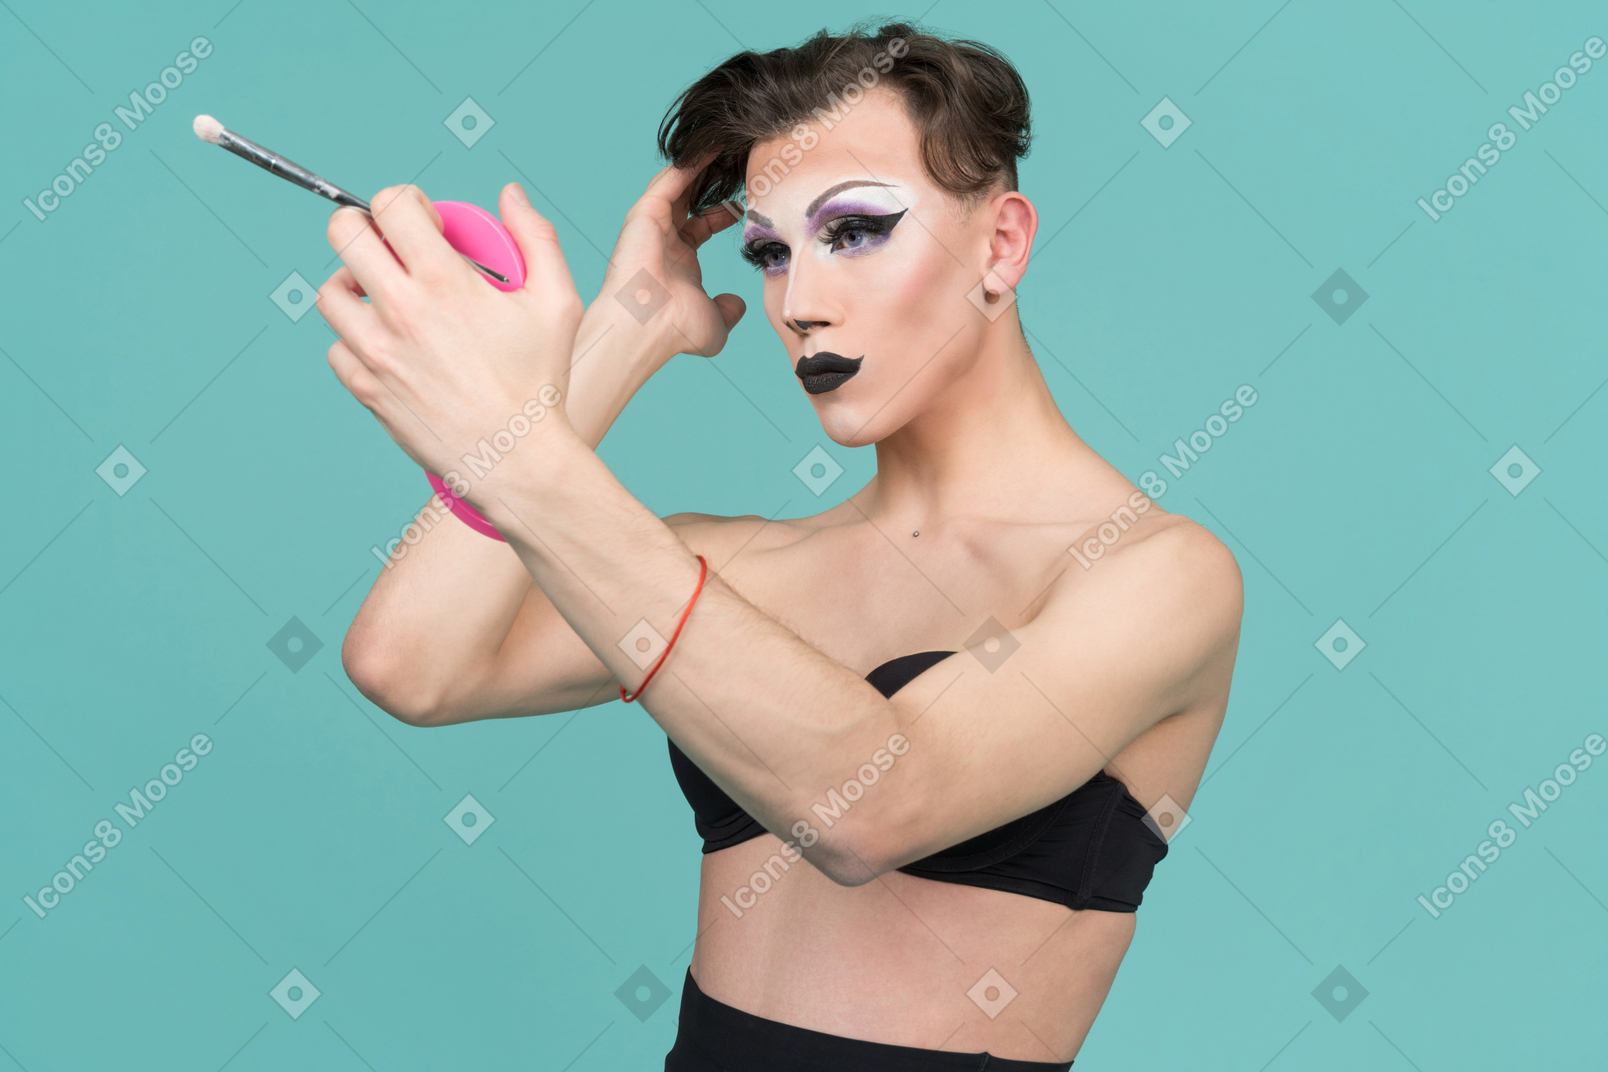 Drag queen fixing hair while looking in the mirror